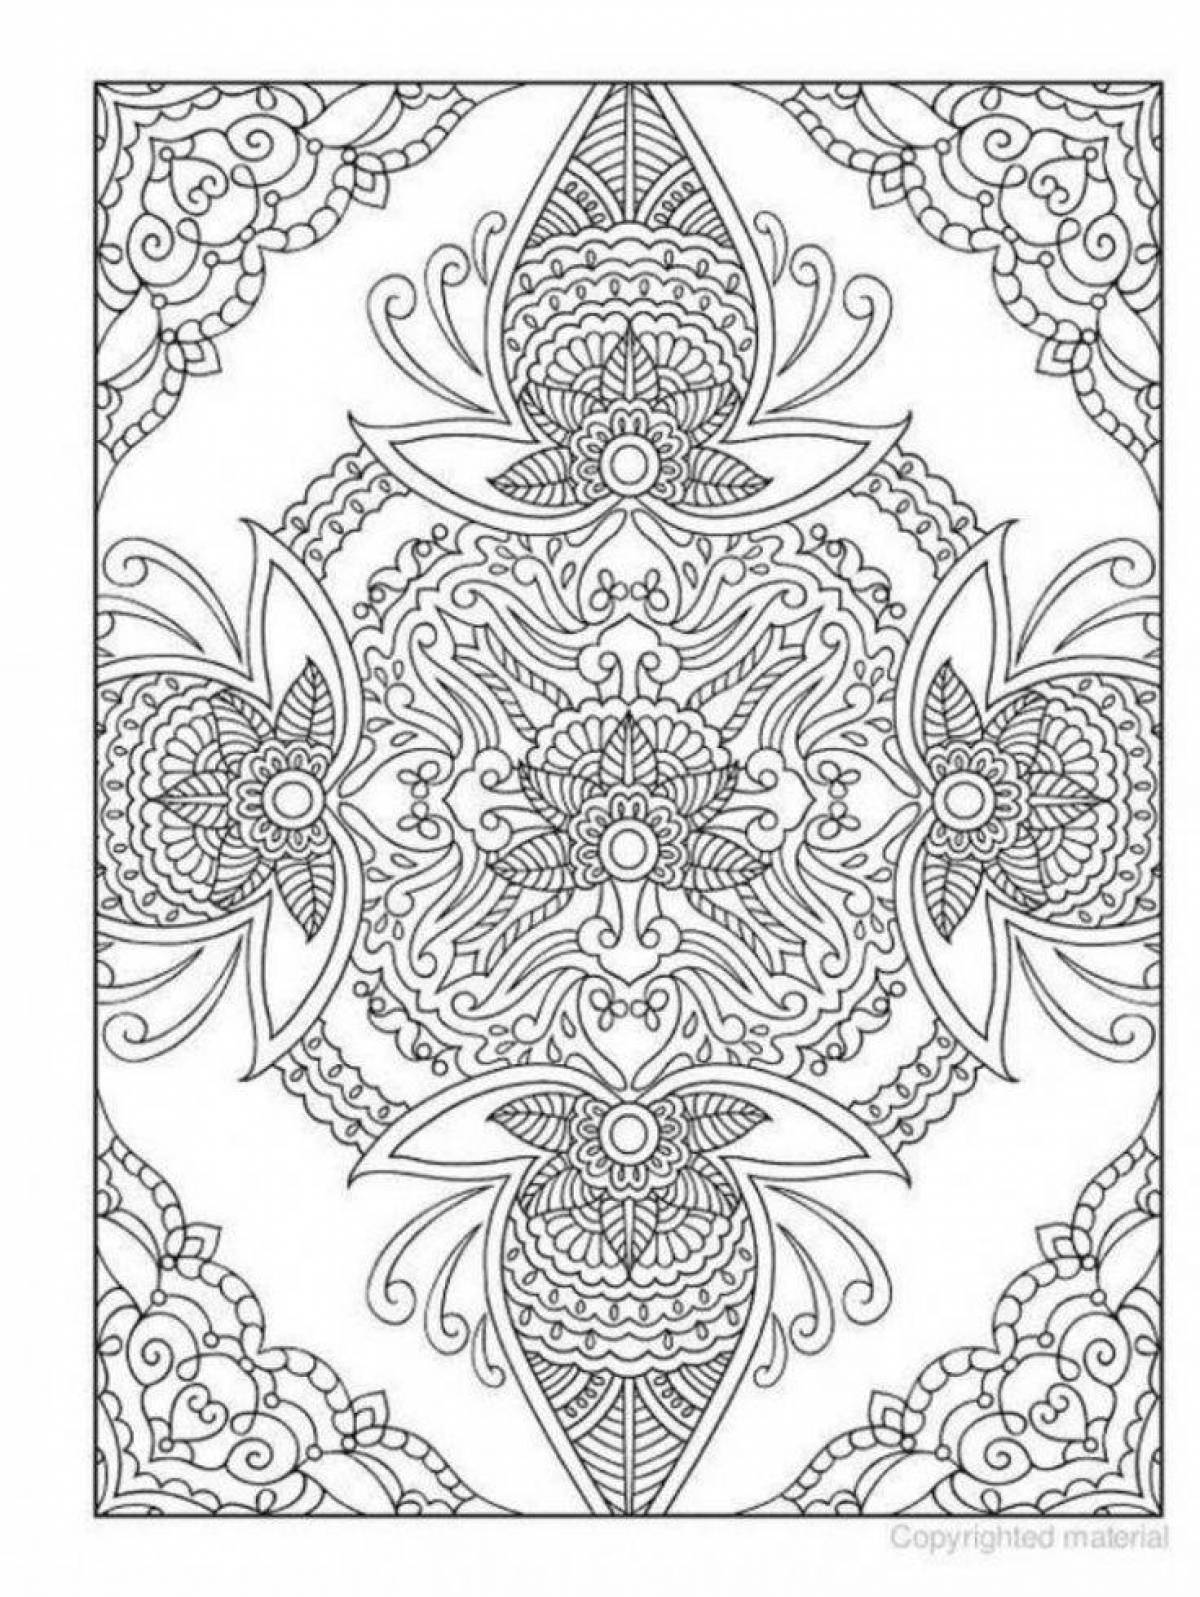 Stress reduction coloring page